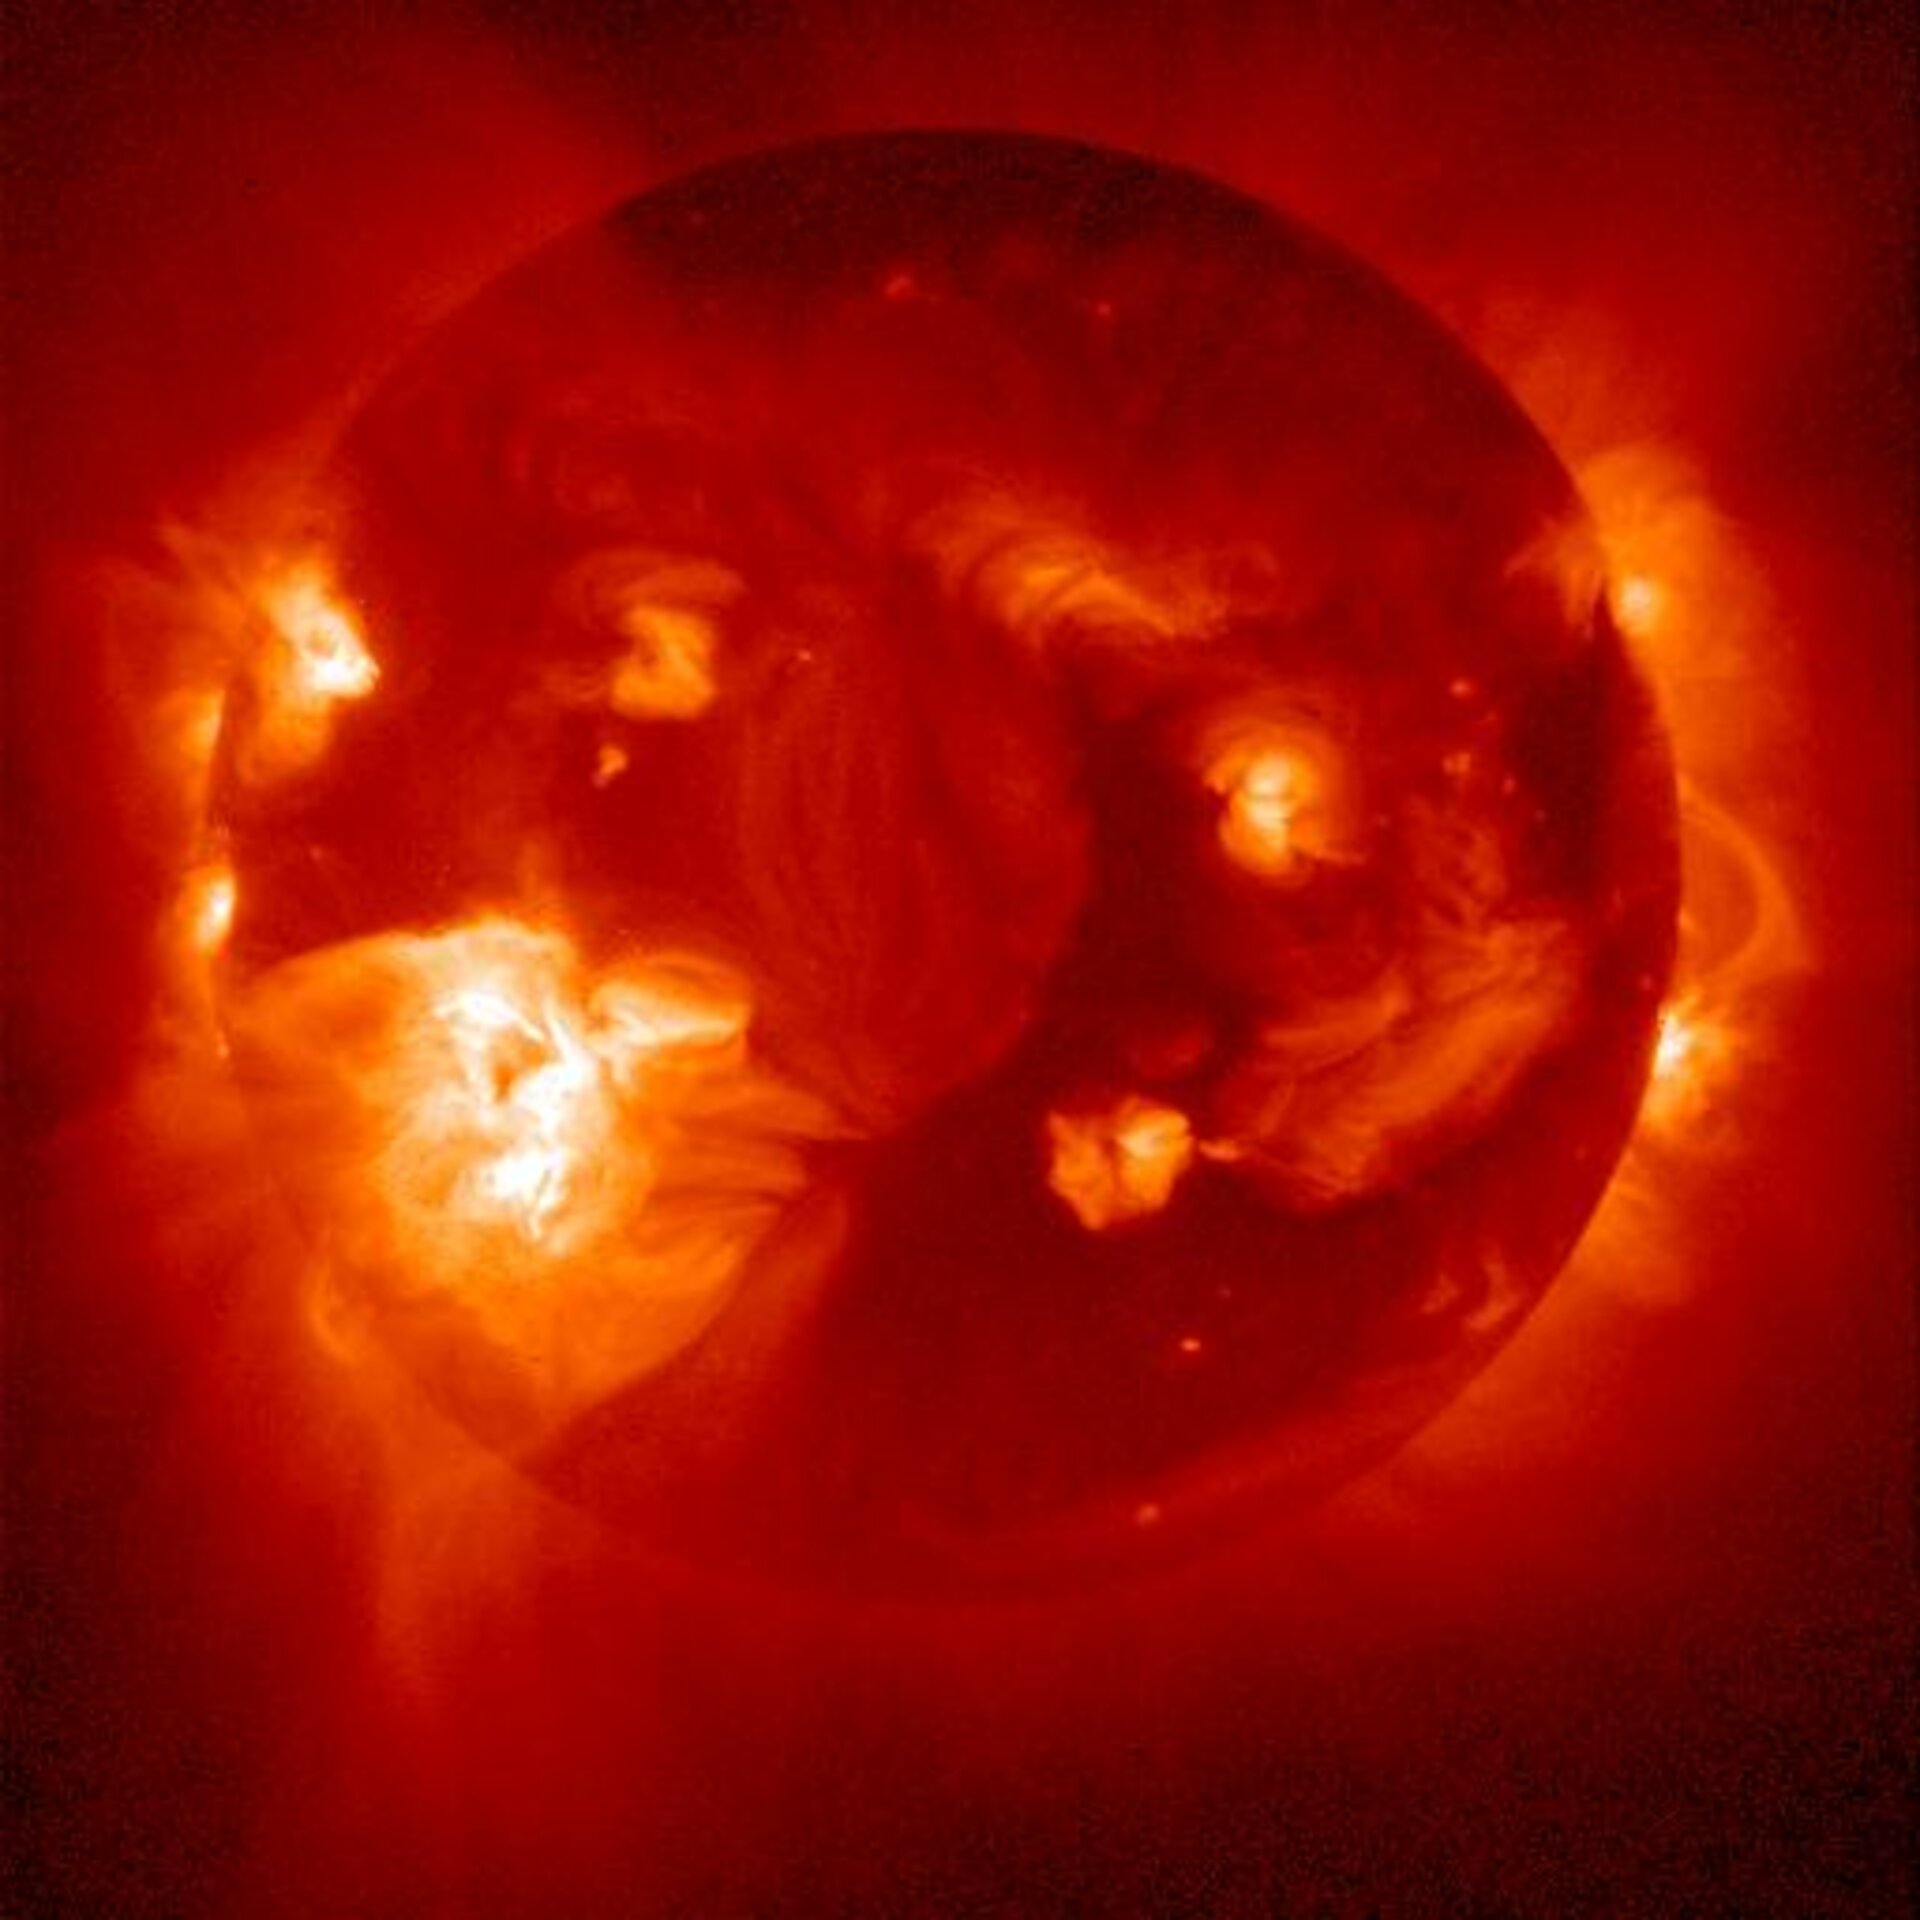 The active Sun as seen by the Yohkoh Soft X-Ray telescope